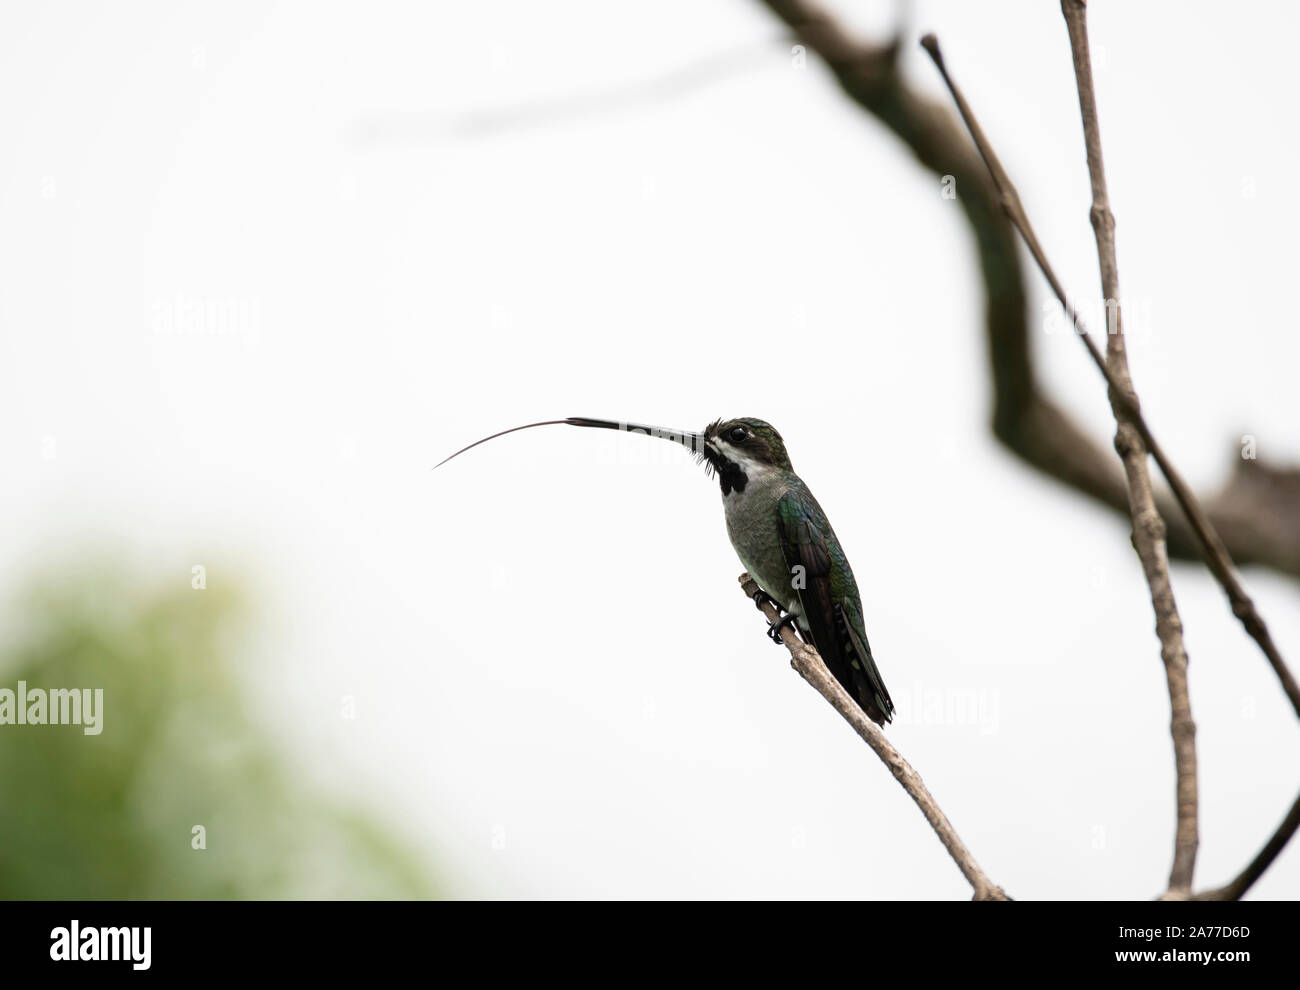 Long-billed Starthroat (Heliomaster longirostris) perched on a tree branch Stock Photo